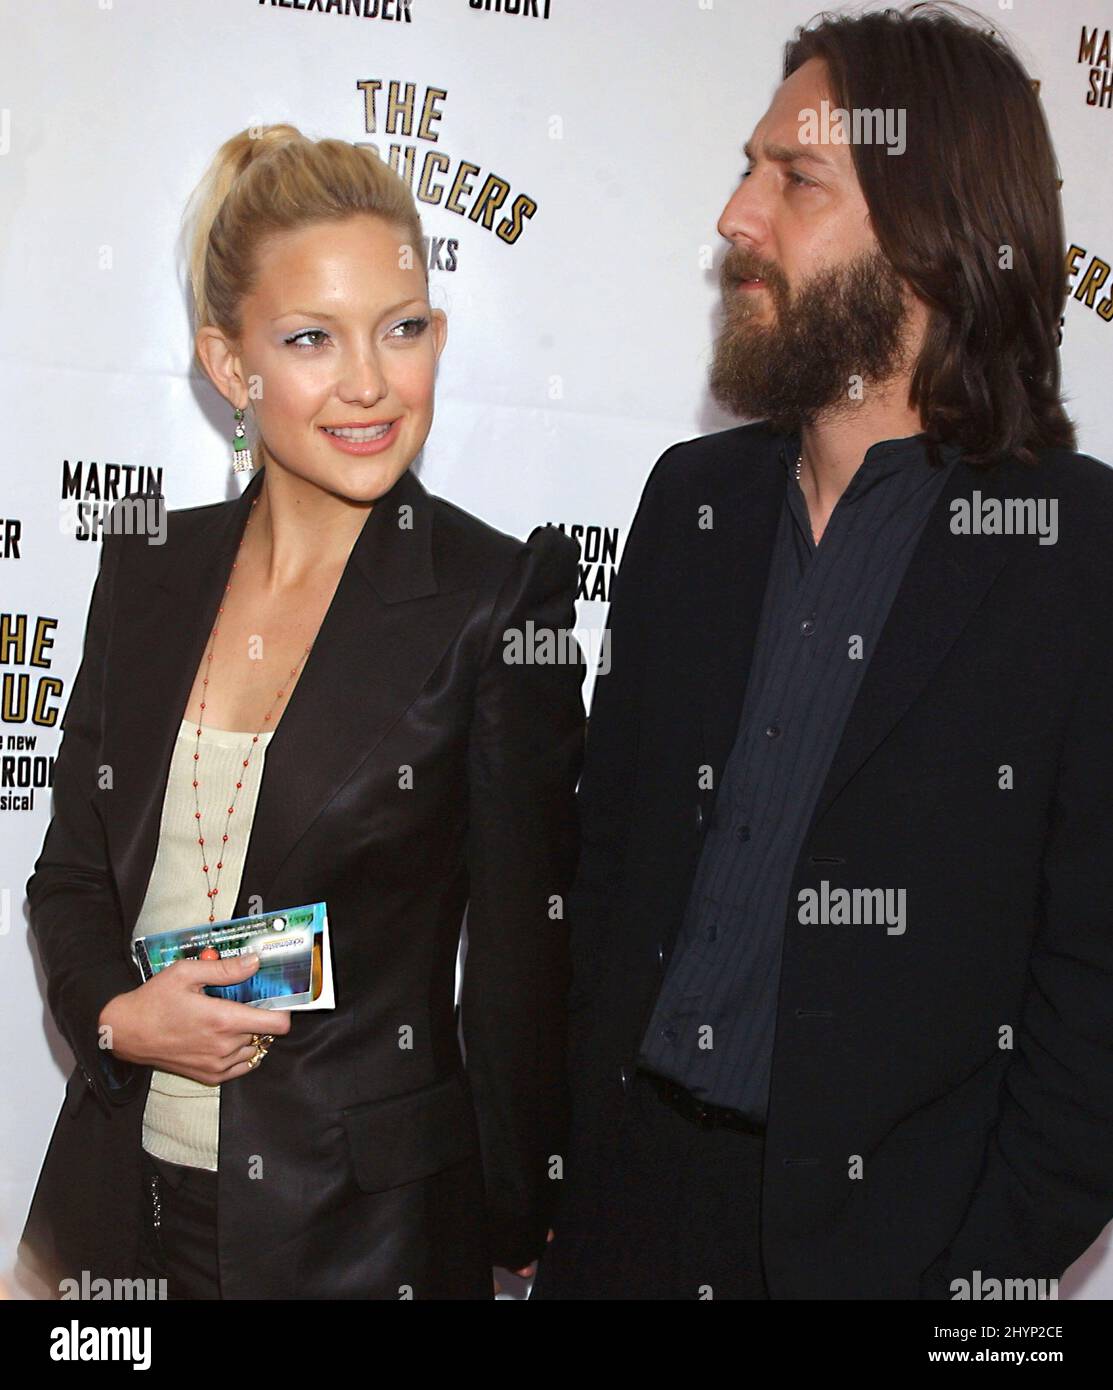 KATE HUDSON & CHRIS ROBINSON ATTEND 'THE PRODUCERS' PLAY OPENING NIGHT HELD AT THE PANTAGES THEATRE, HOLLYWOOD. PICTURE: UK PRESS Stock Photo